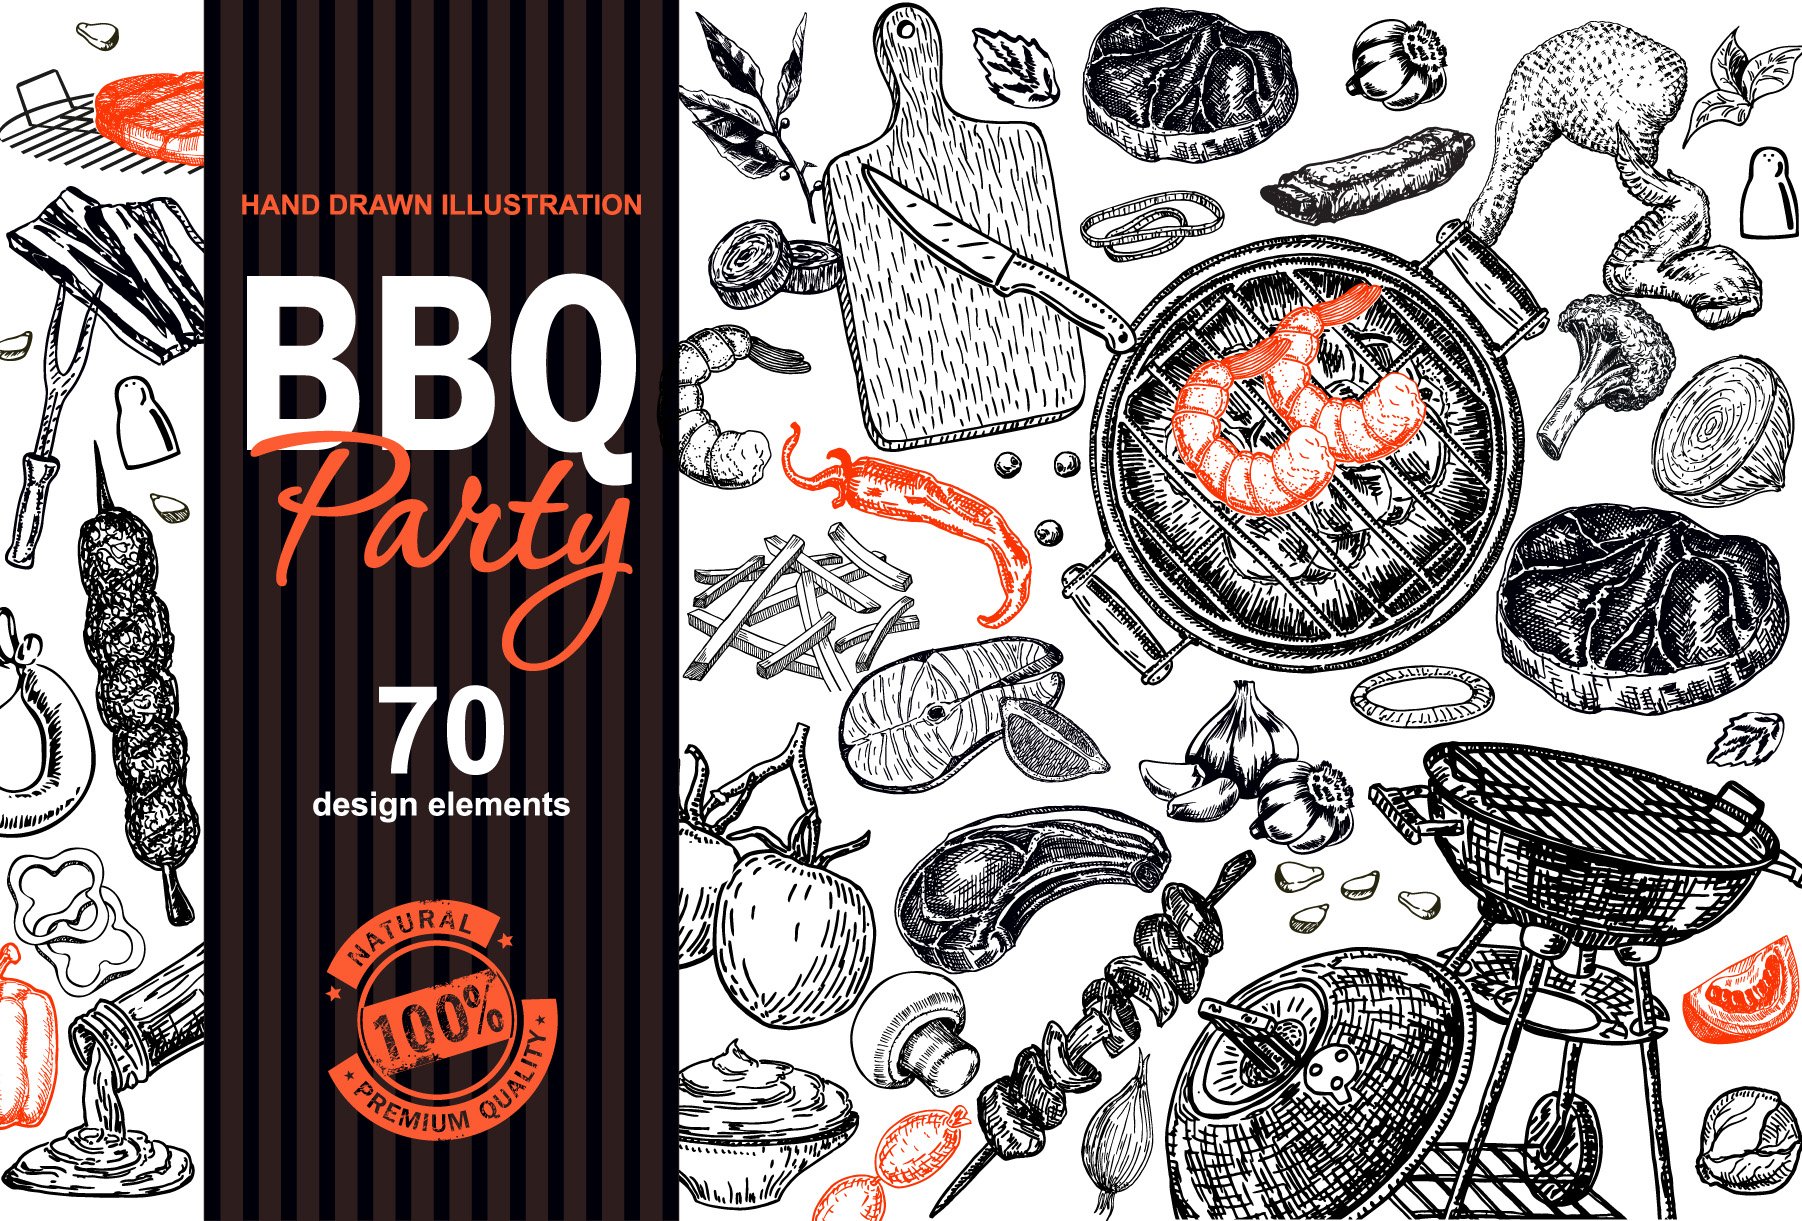 Barbecue hand drawn illustration set cover image.